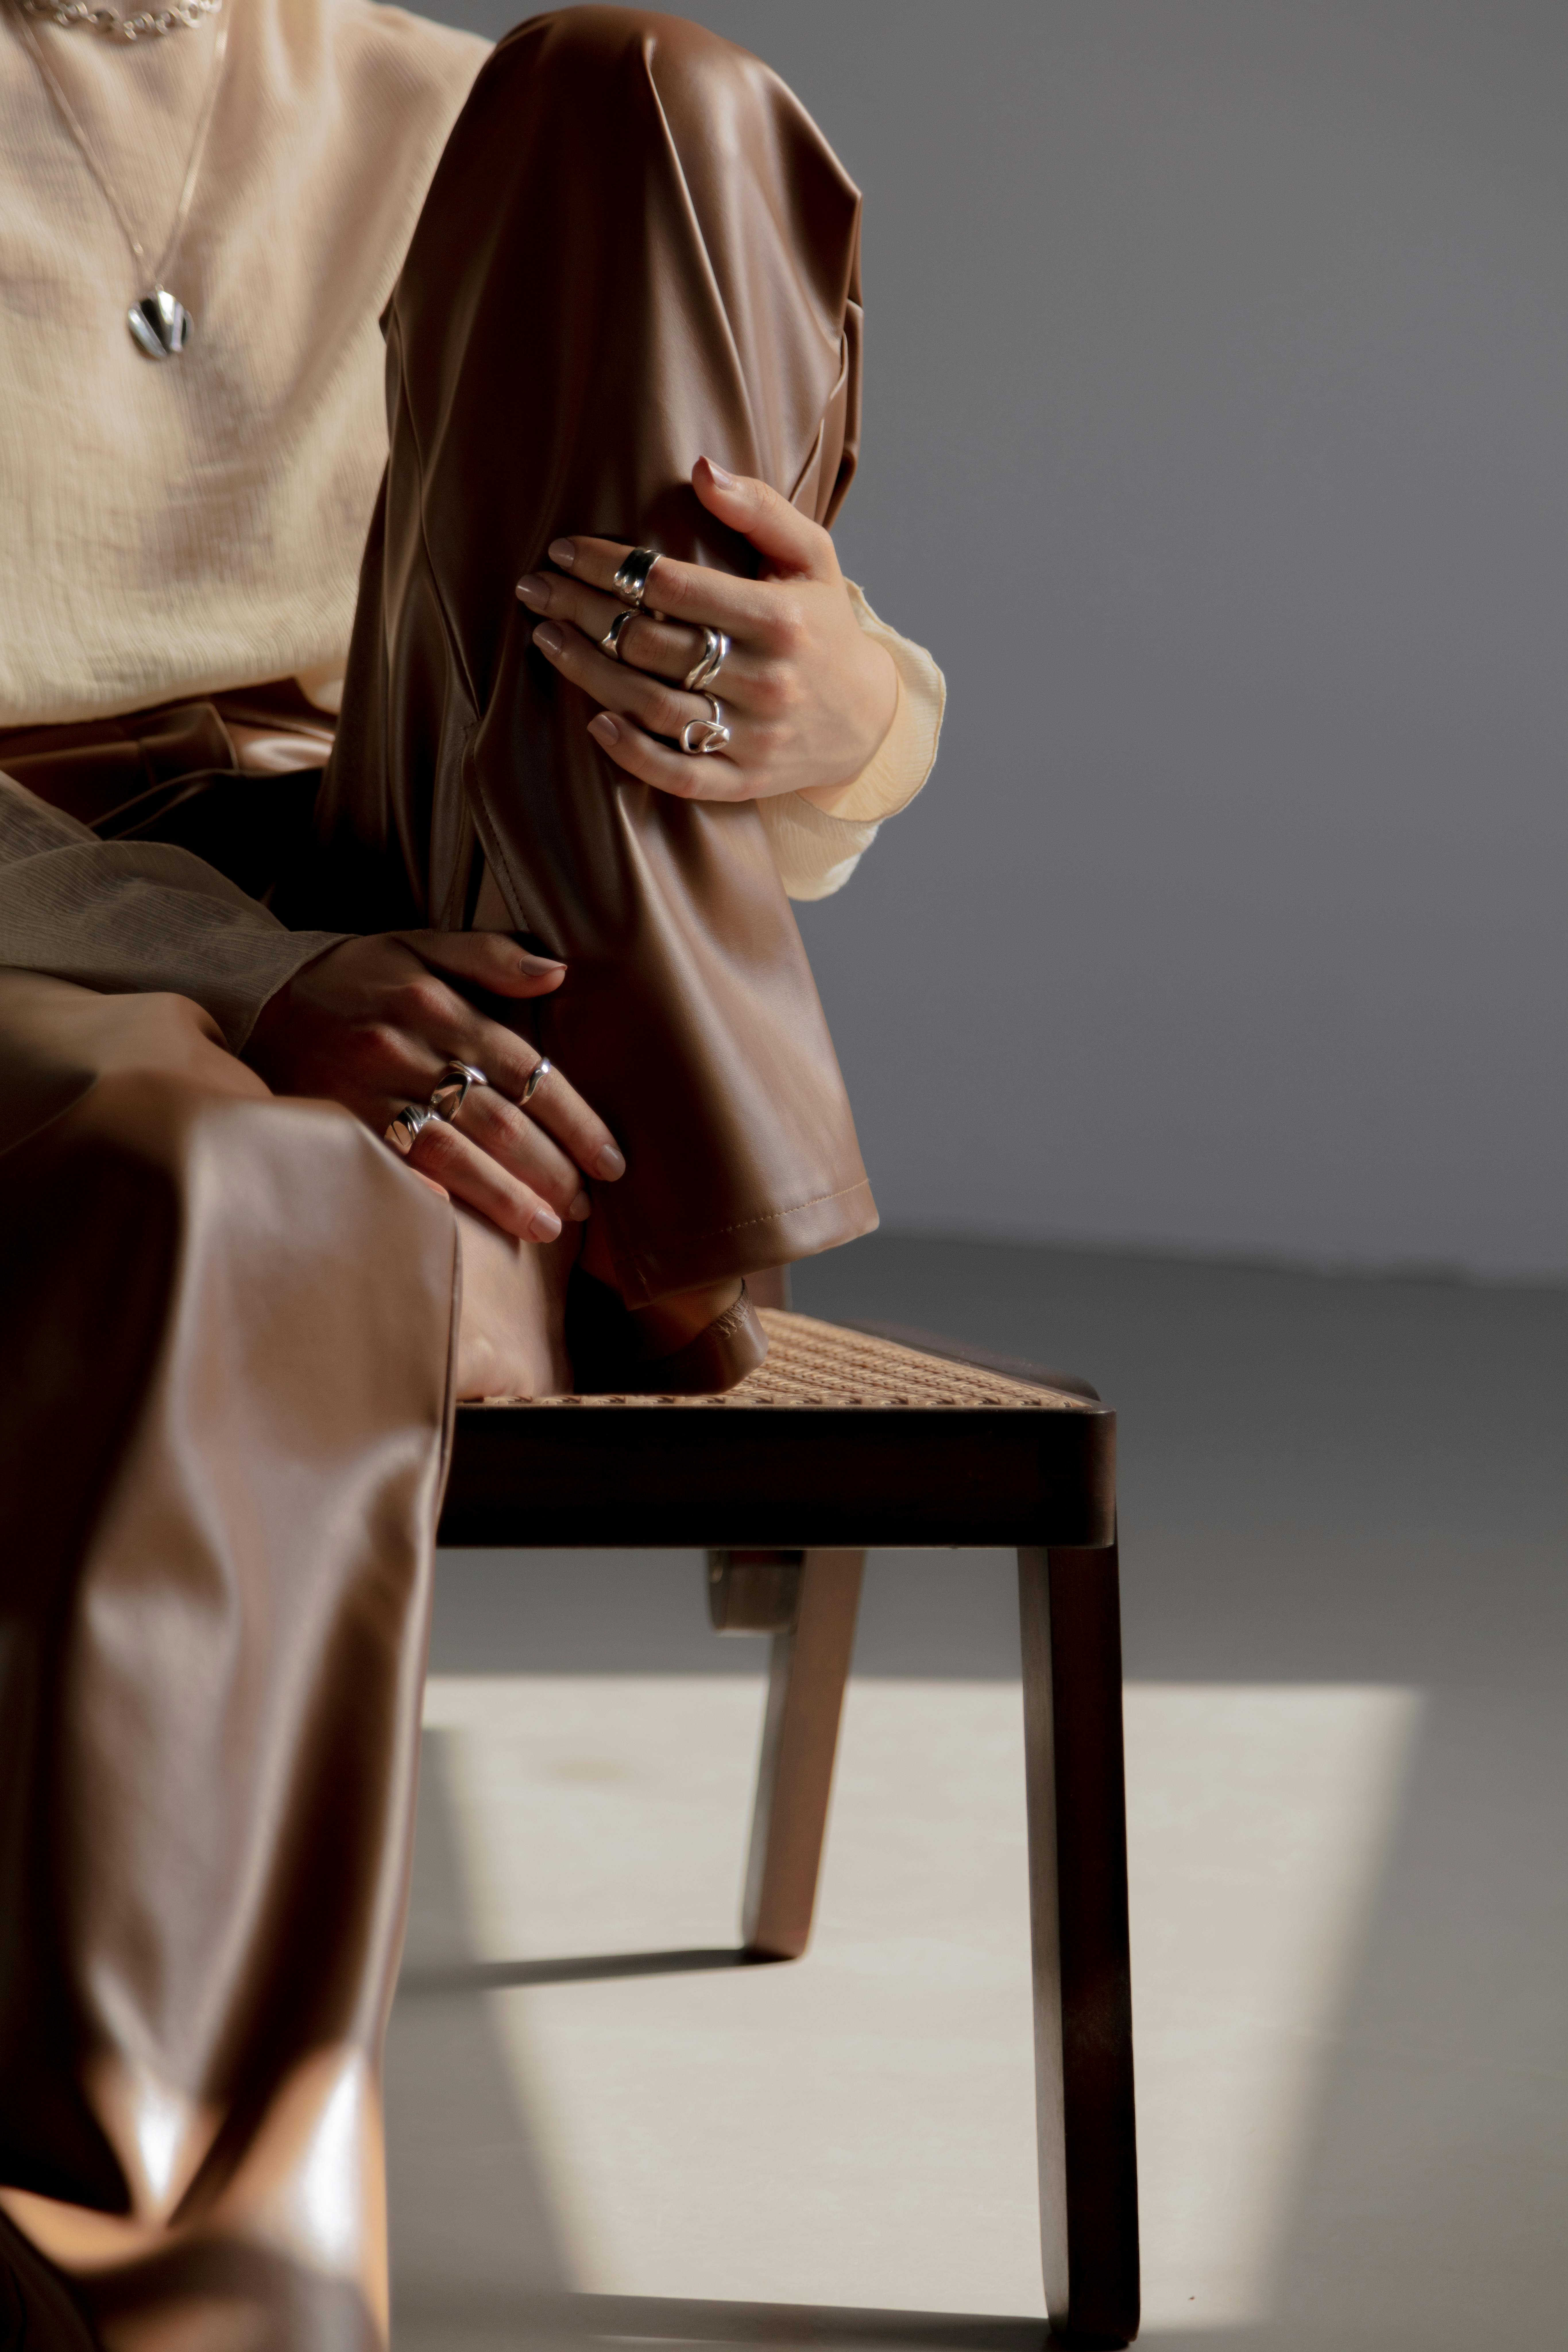 person sitting on brown wooden chair wearing silver rings